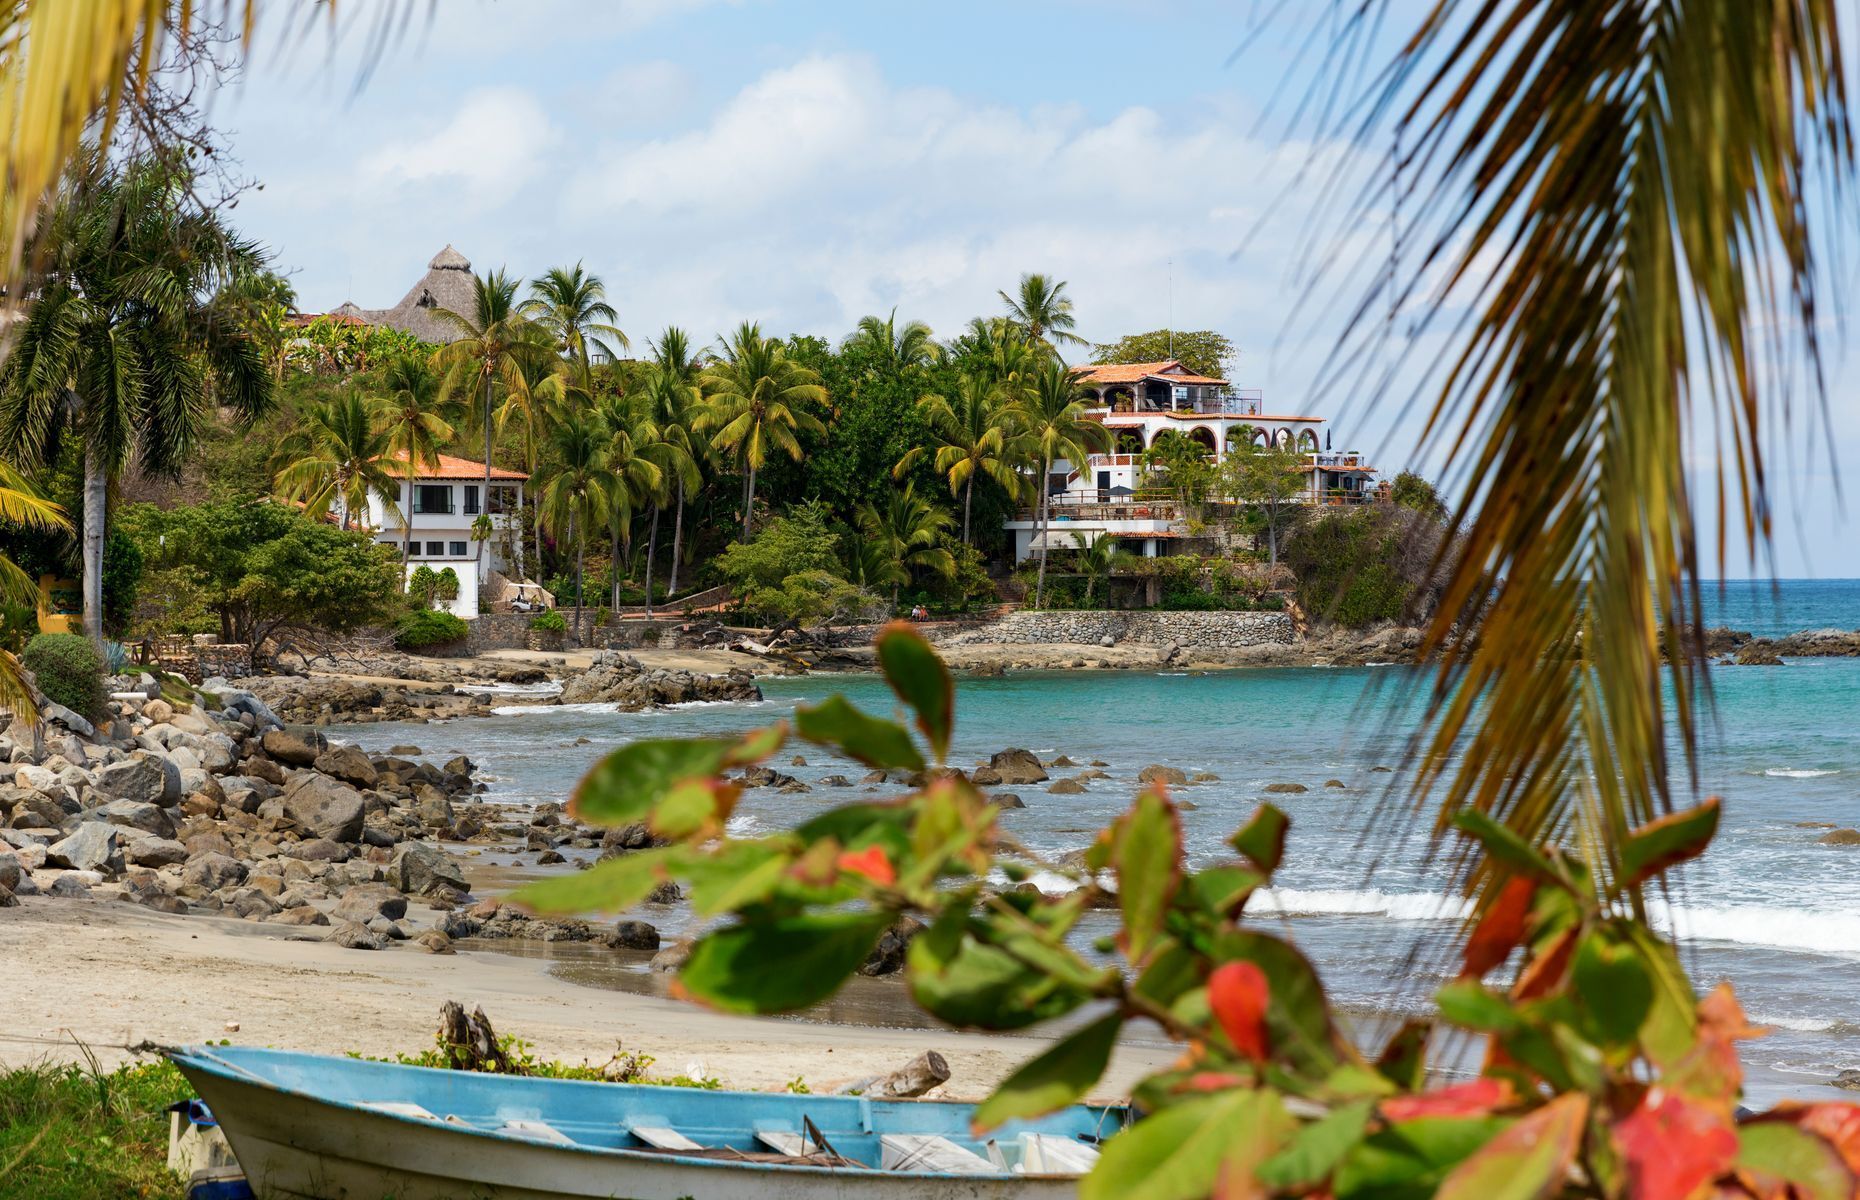 <p><a href="https://www.rivieranayarit.com/destinations/sayulita/" rel="noreferrer noopener">Sayulita</a>, on the Riviera Nayarit, is an ideal destination for <a href="https://theculturetrip.com/north-america/mexico/articles/best-surf-spots-near-saylita-mexico/" rel="noreferrer noopener">surfers</a> travelling to Mexico. Its beaches are not only less crowded than elsewhere in the country but also close to abundant natural areas guaranteed to enchant. Rainforest hikes and whale watching at sea are also popular Sayulita activities.</p>